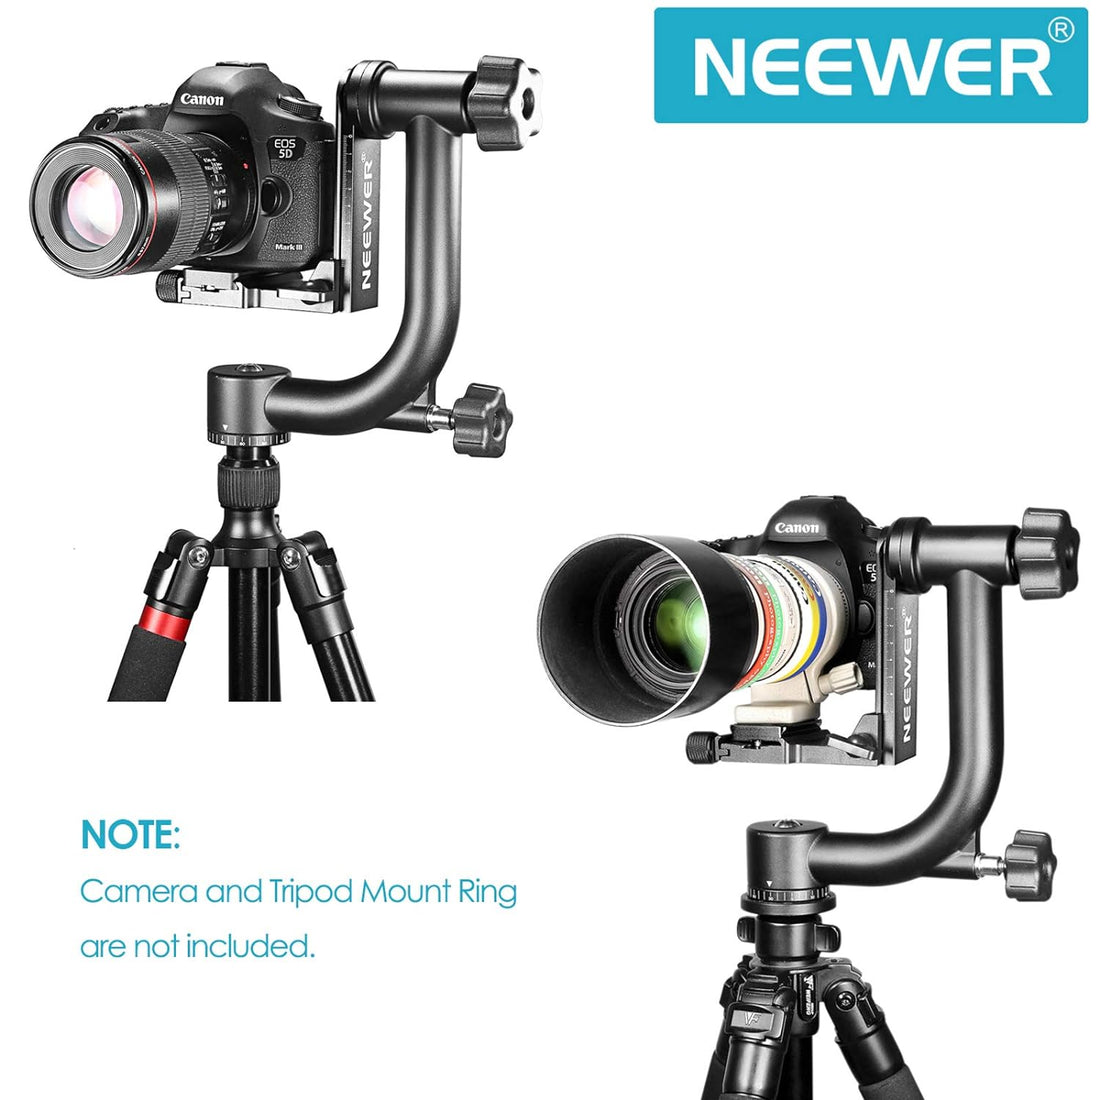 Neewer Metal 360 degree Panoramic Gimbal Tripod Head with Arca-Swiss Standard for Digital SLR Cameras up to 30lbs/13.6 kg